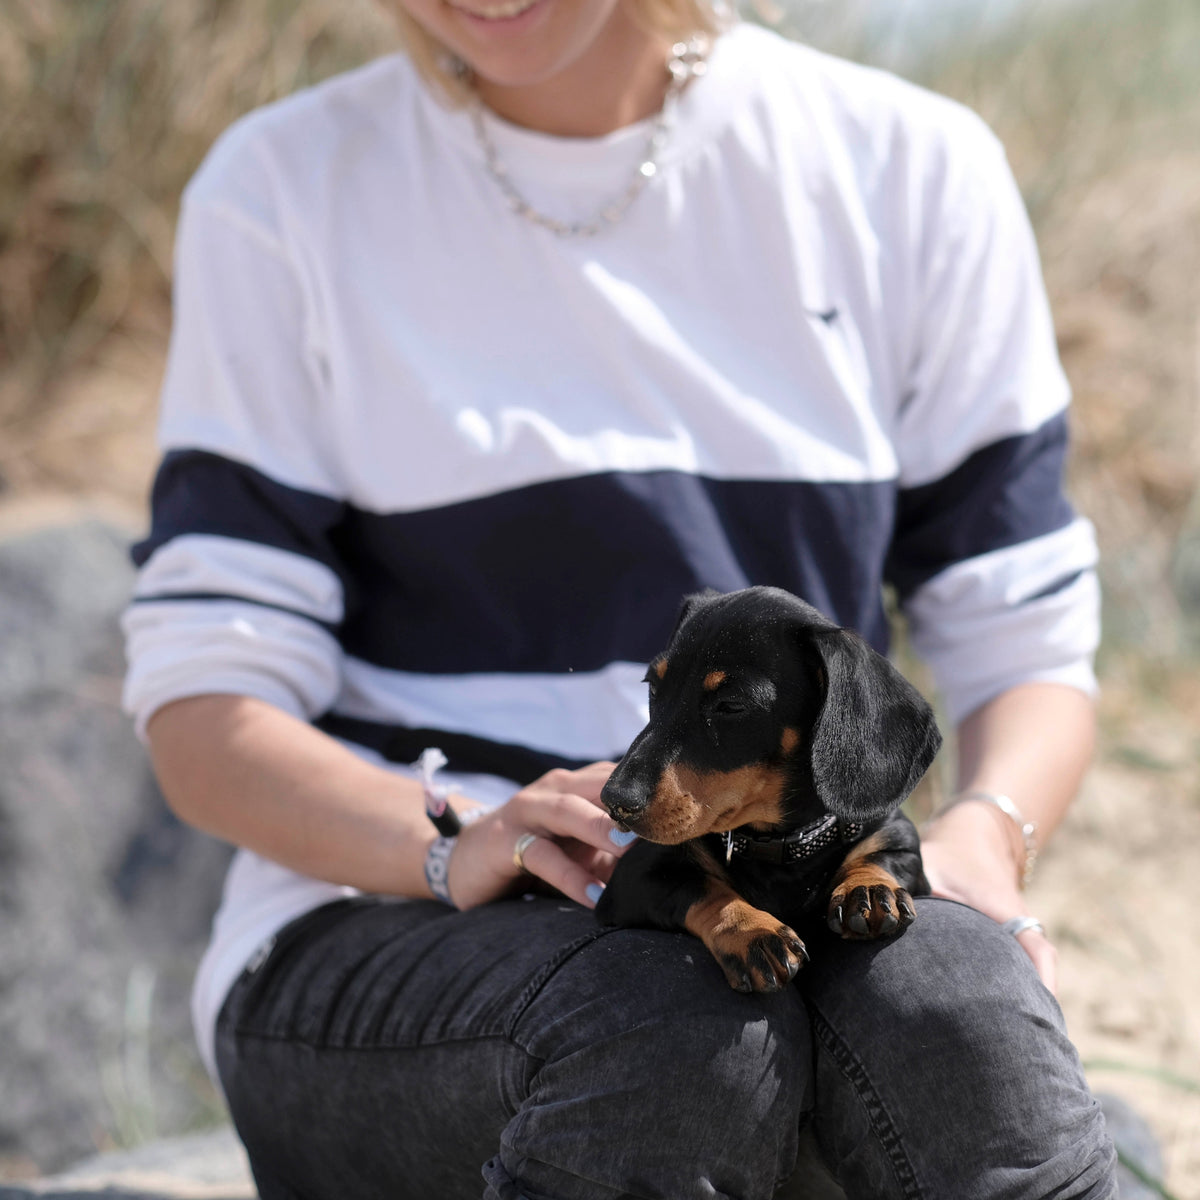 Ellie Wales wearing an original Whale Of A Time Clothing design with a young dachshund puppy on her lap at the beach